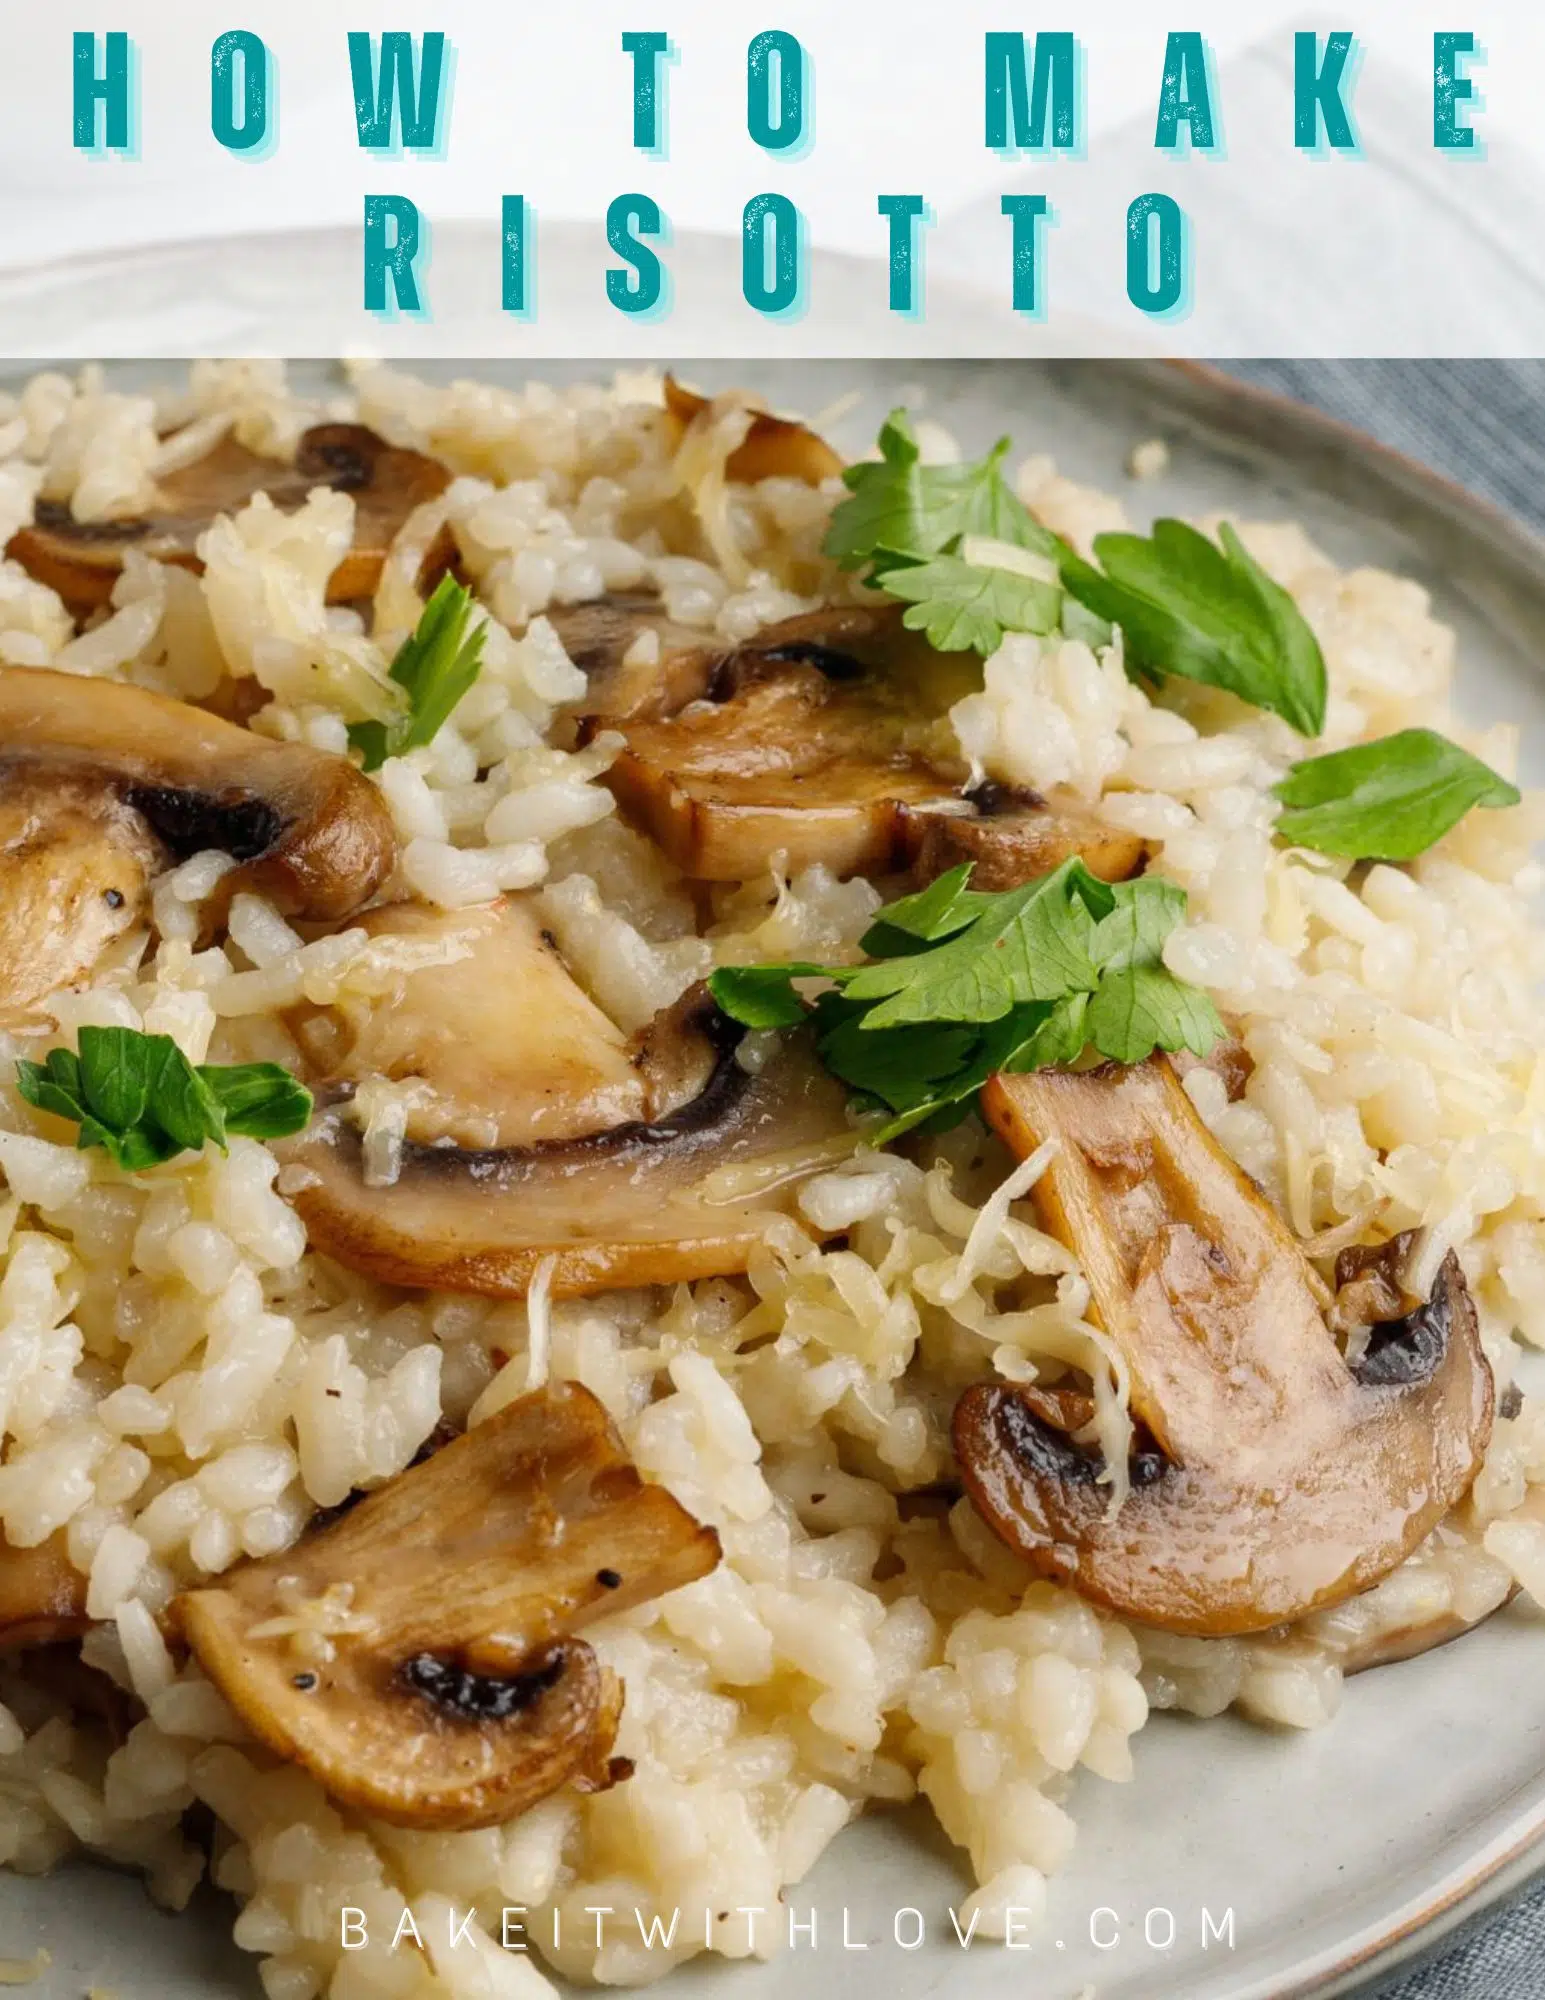 Pin image with text showing a plate of mushroom risotto.